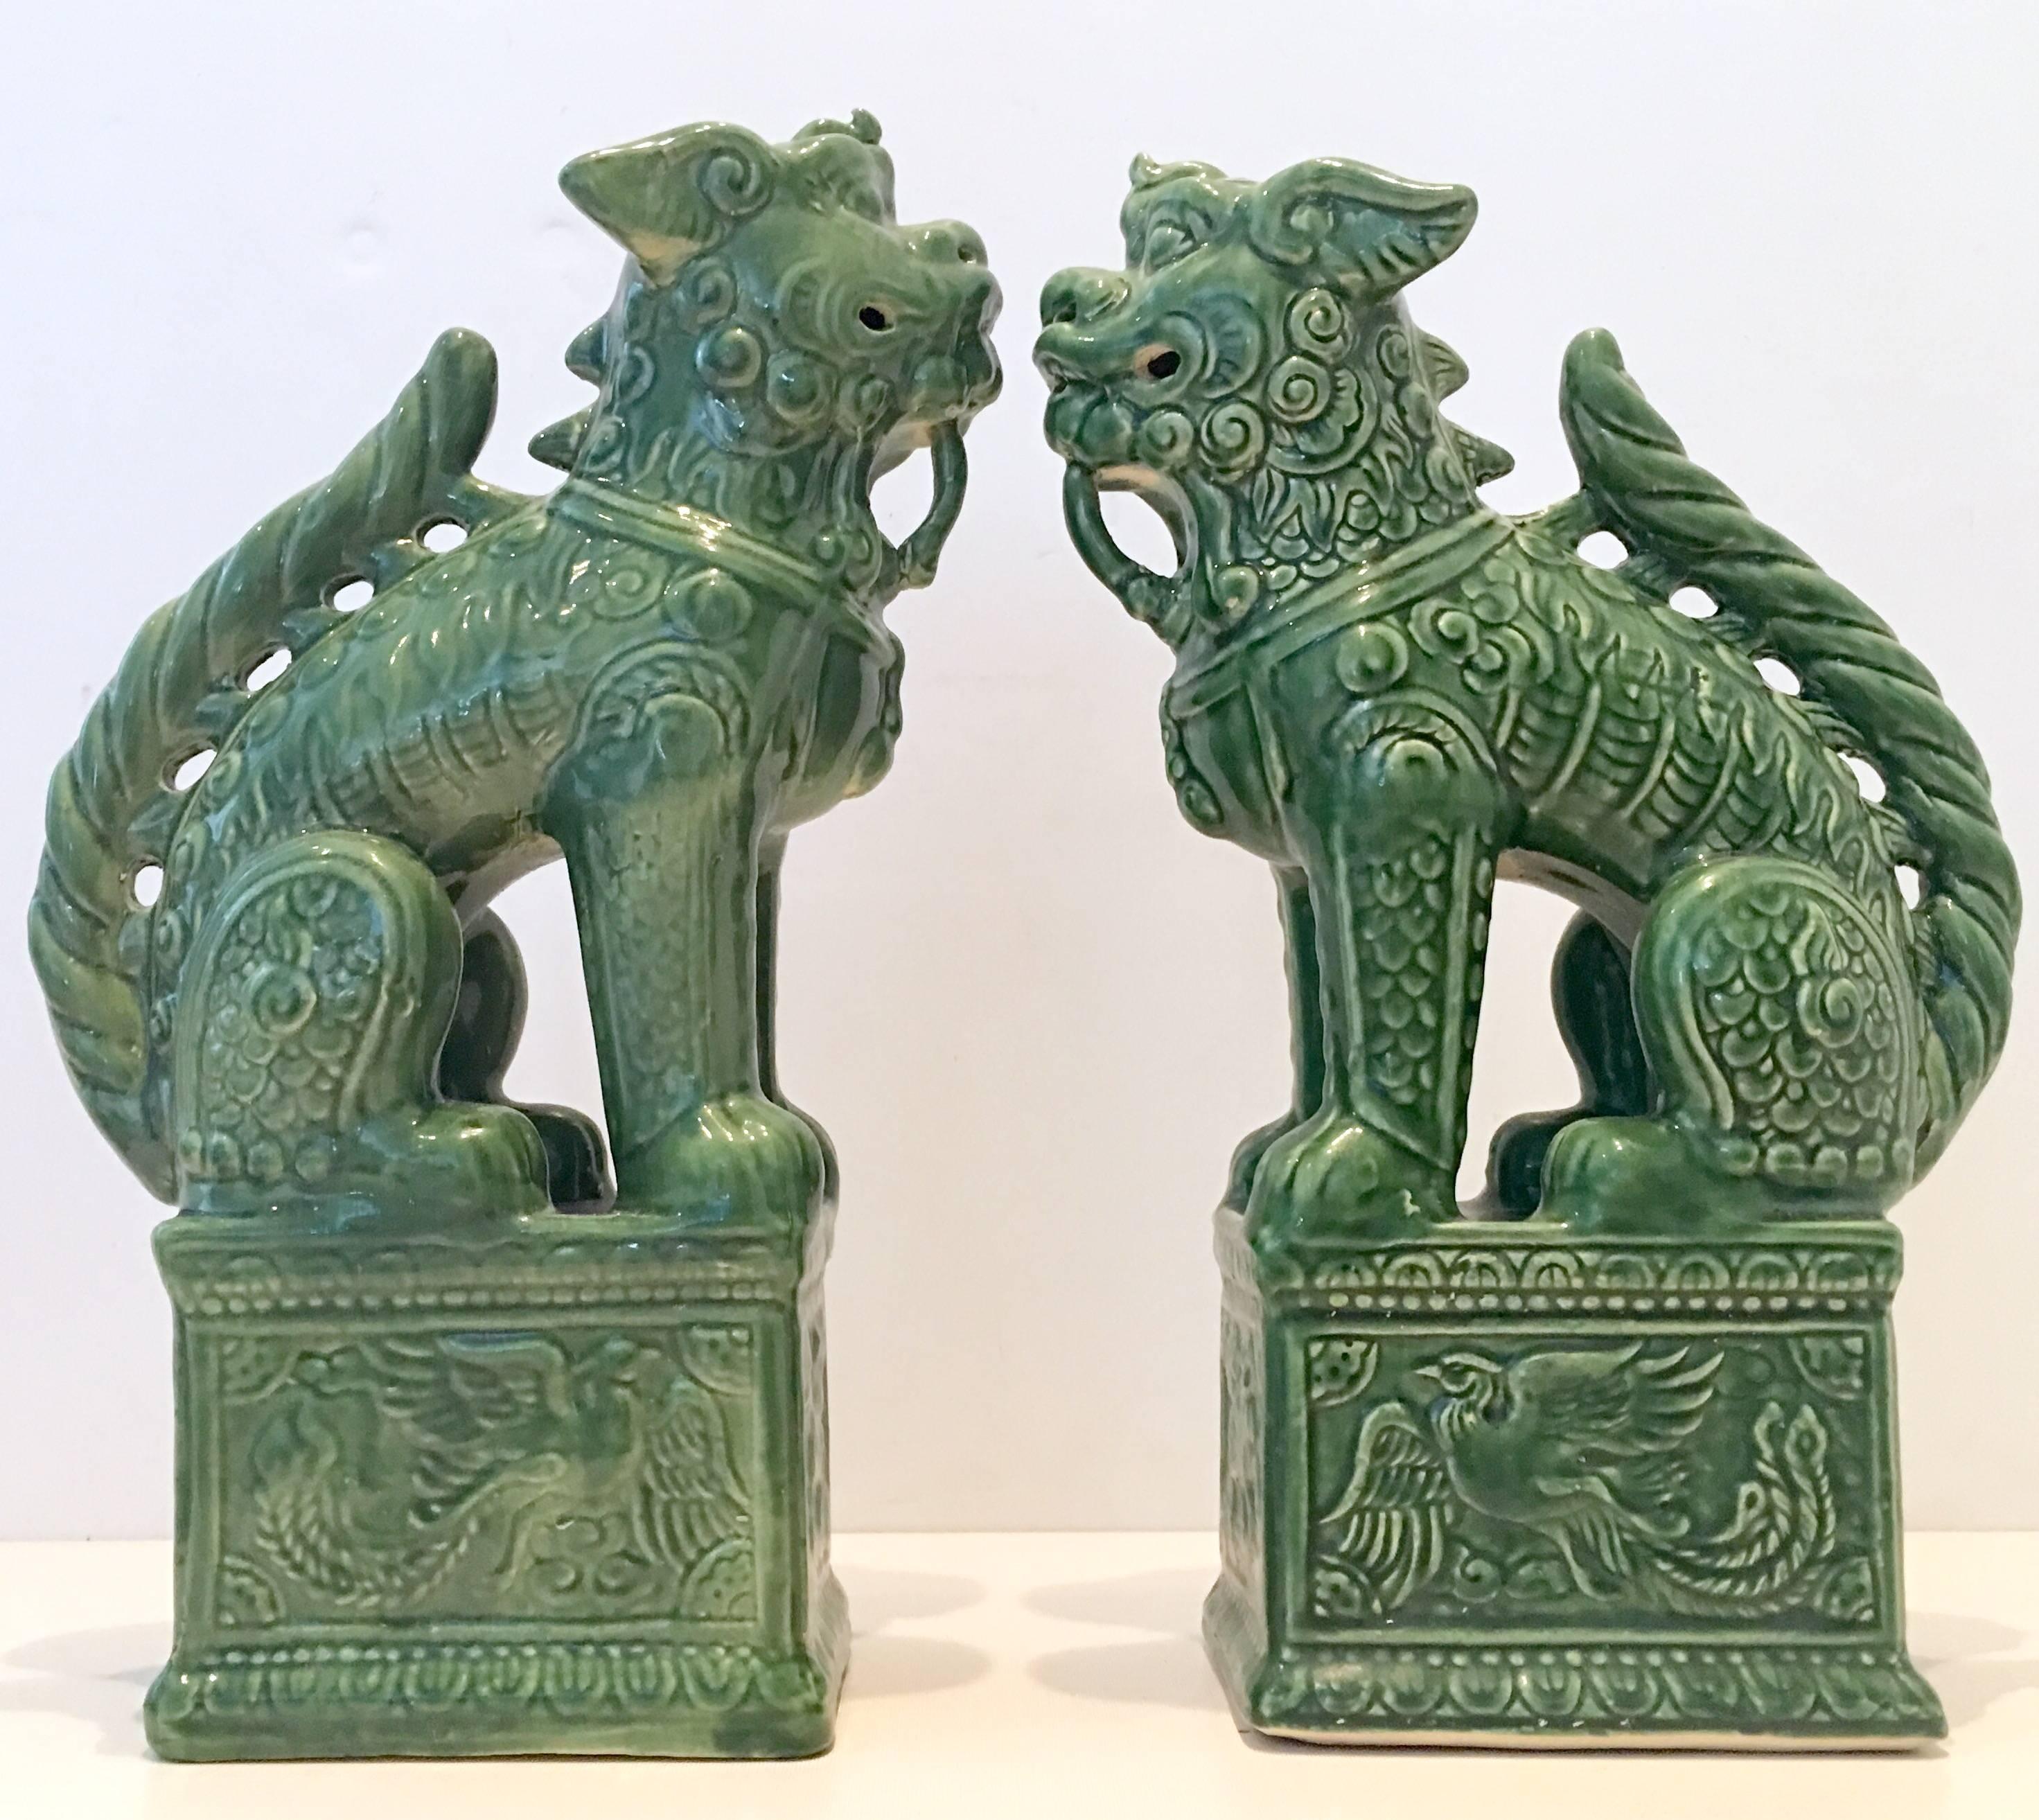 Pair of 21st century ceramic glaze large foo dog-guardian lion sculptures. Finished in green with excellent attention to detail.